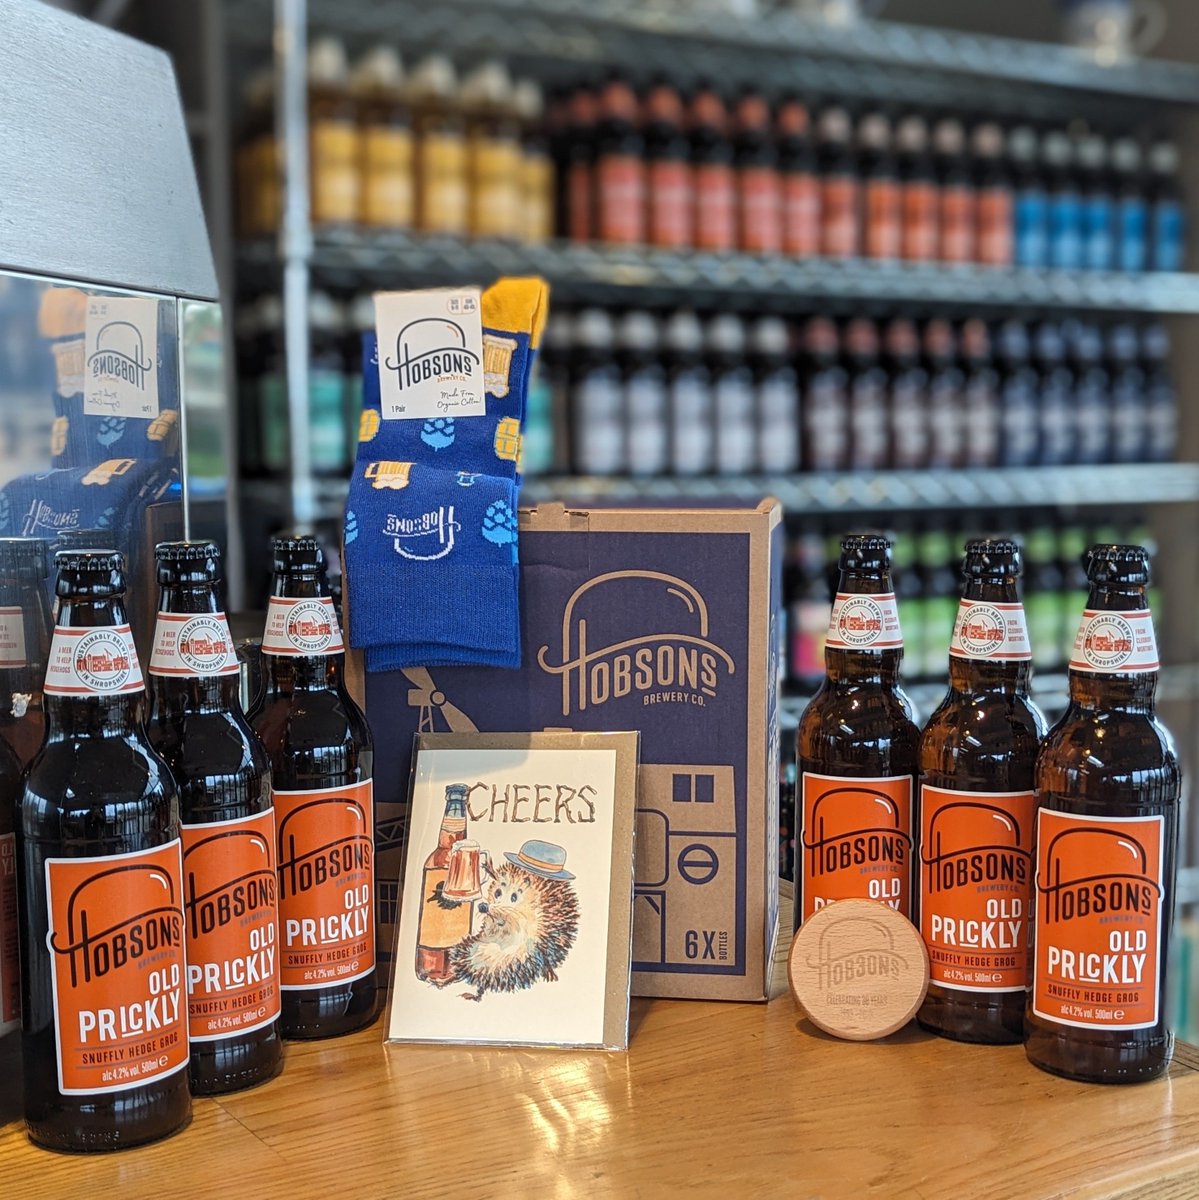 📢 COMPETITION 📢 Today’s #hedgehogweek competition is for Old Prickly beer & goodies from @HobsonsBrewery 🍻🦔 To enter, design a #hedgehog-themed beer bottle & share in the comments below or DM your design to us. We'll choose a winner after 8pm tonight! [UK & Over 18s only]